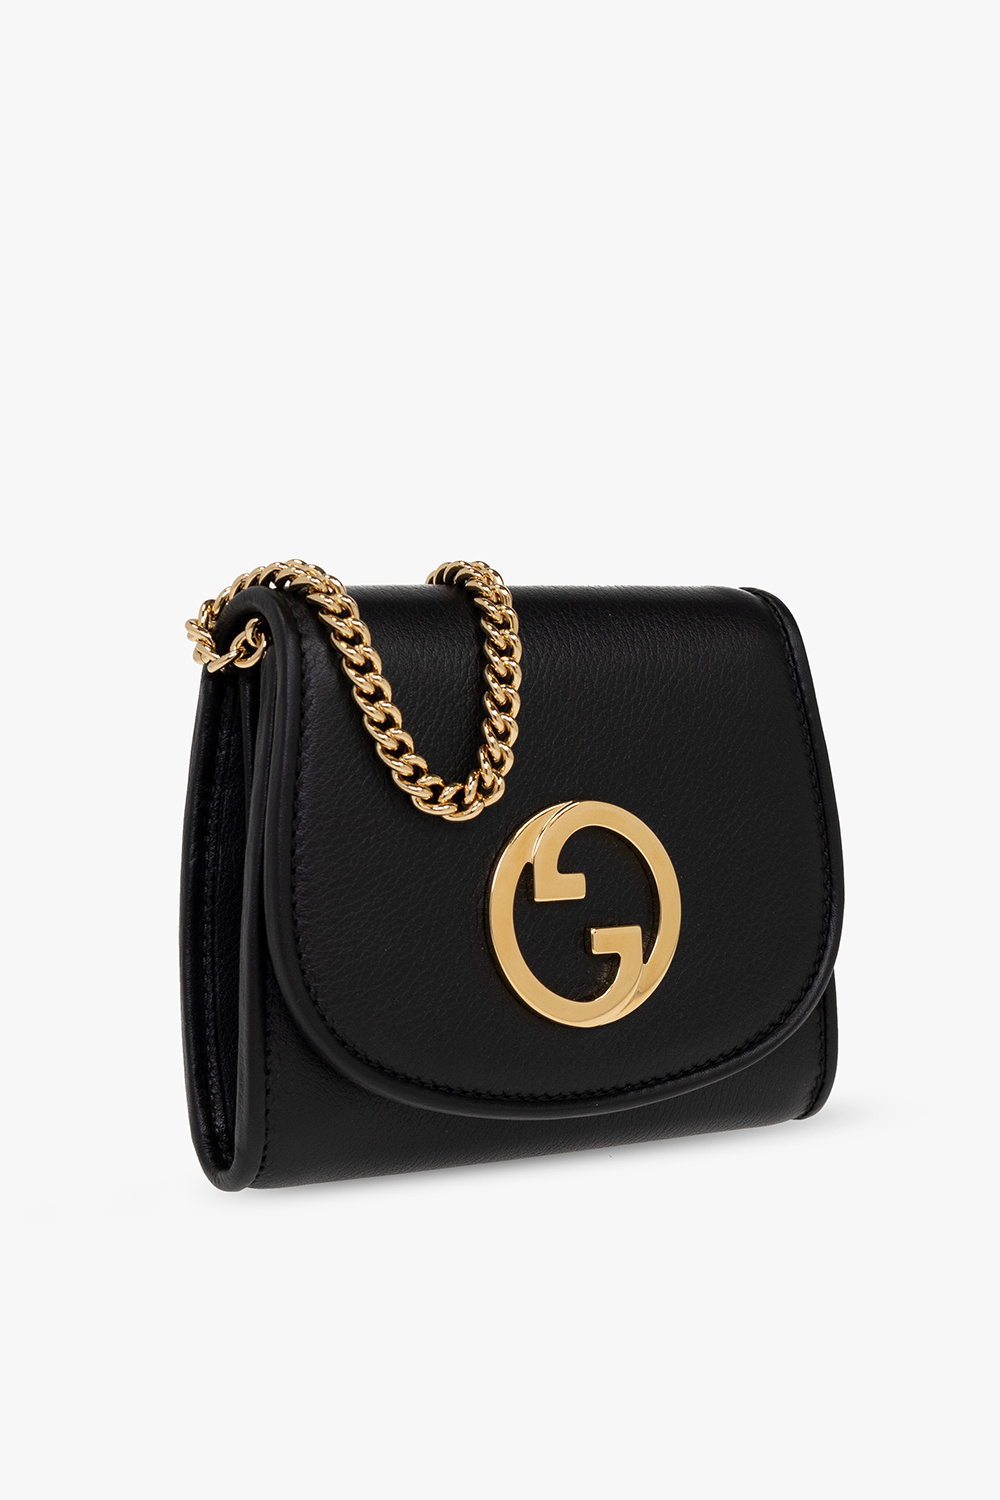 Gucci ‘Blondie’ wallet with chain